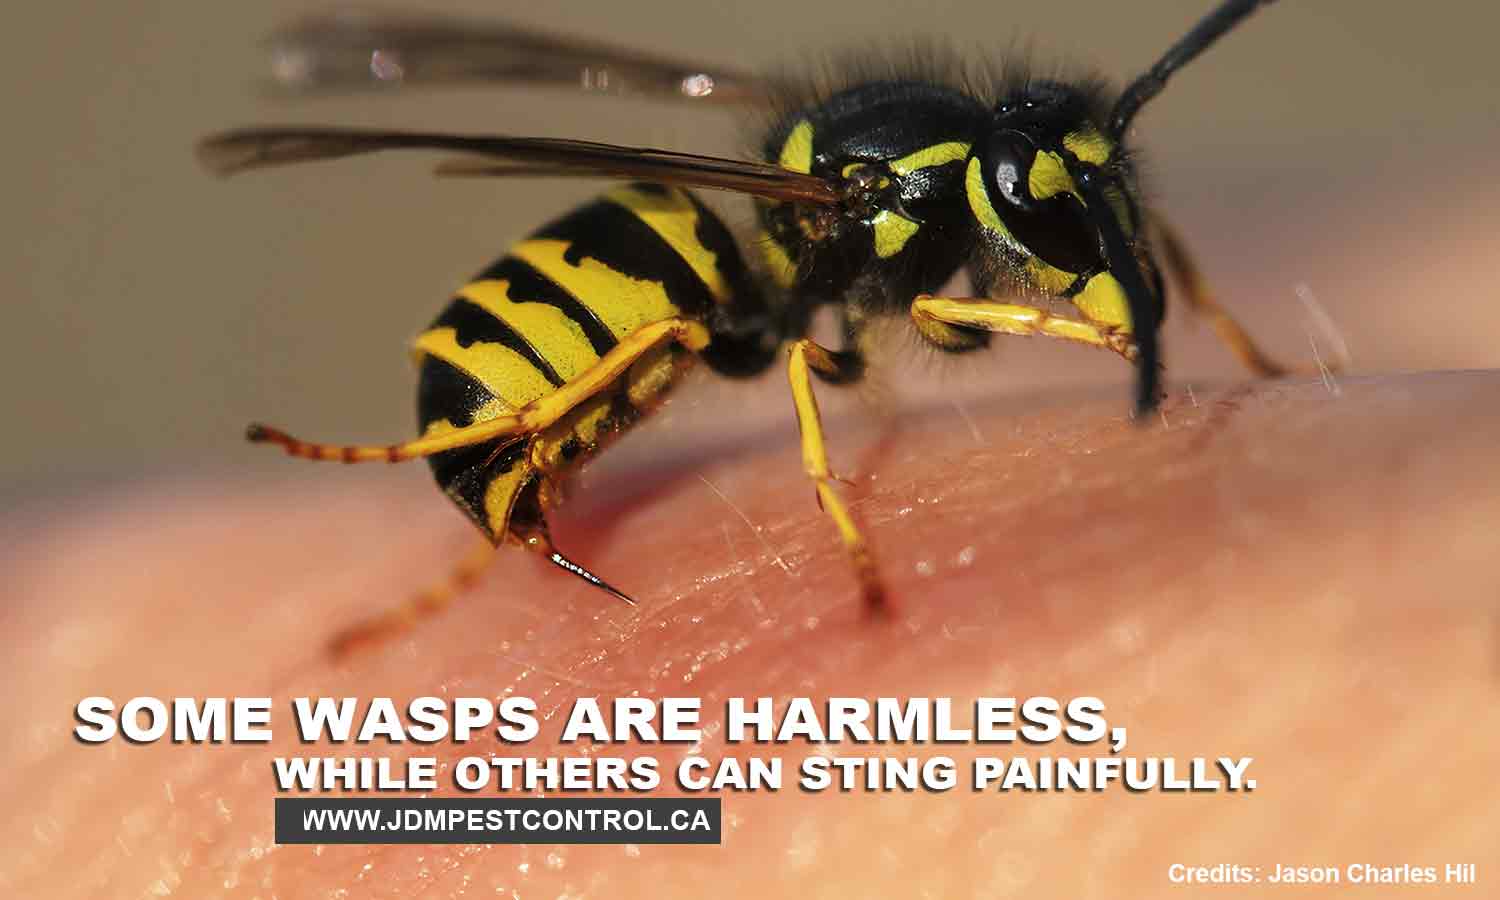 Some wasps are harmless, while others can sting painfully.